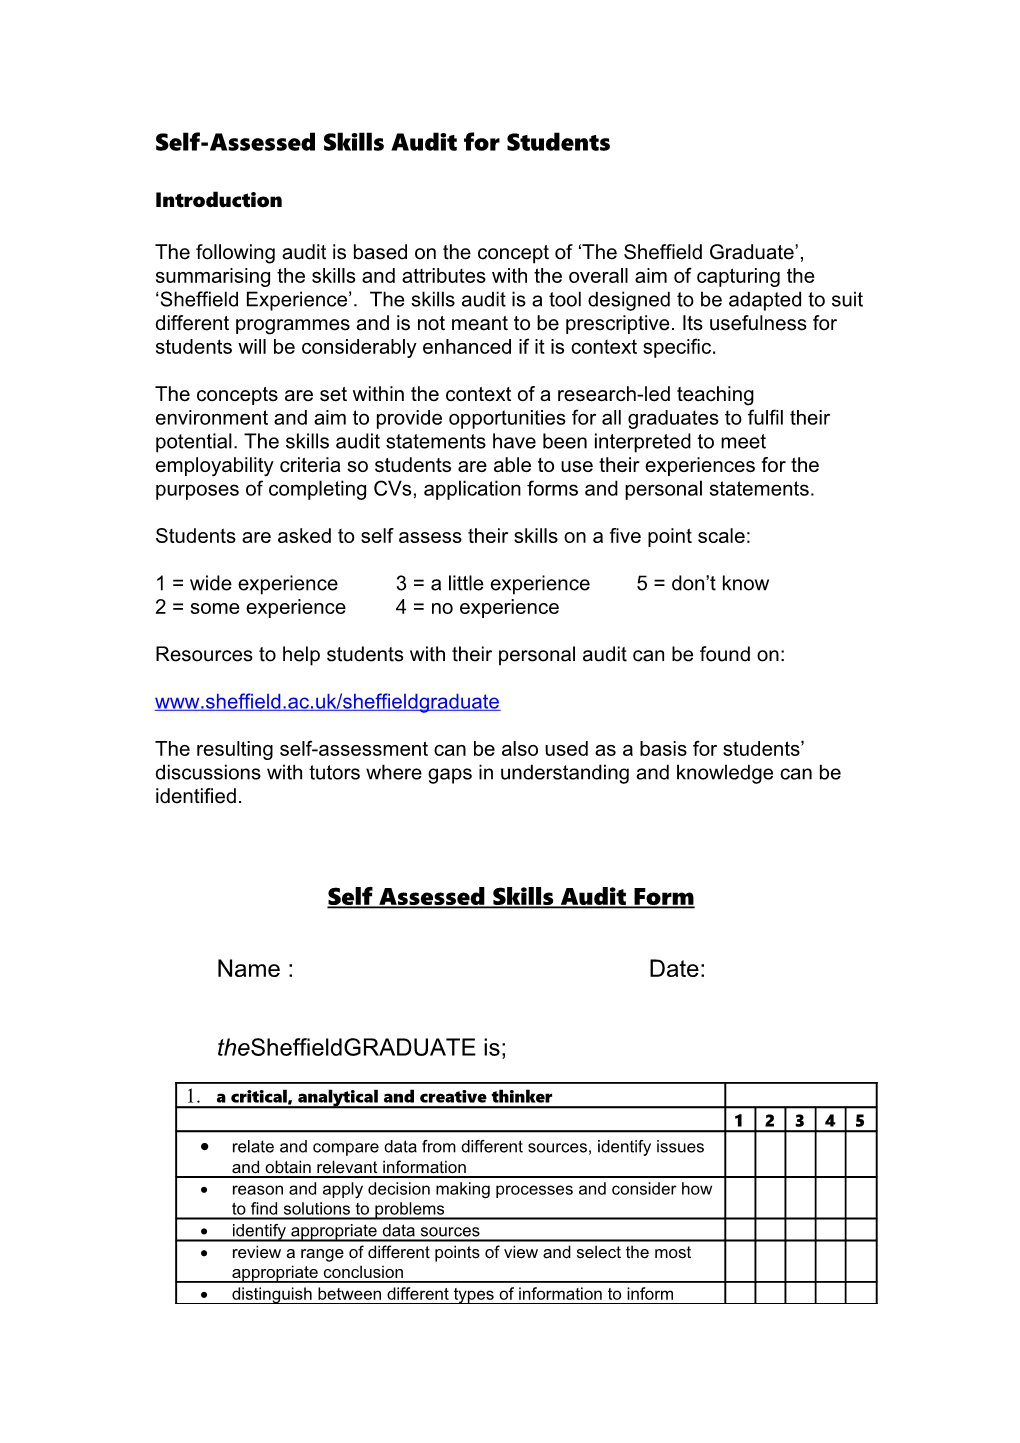 Self Assessed Skills Audit for Students